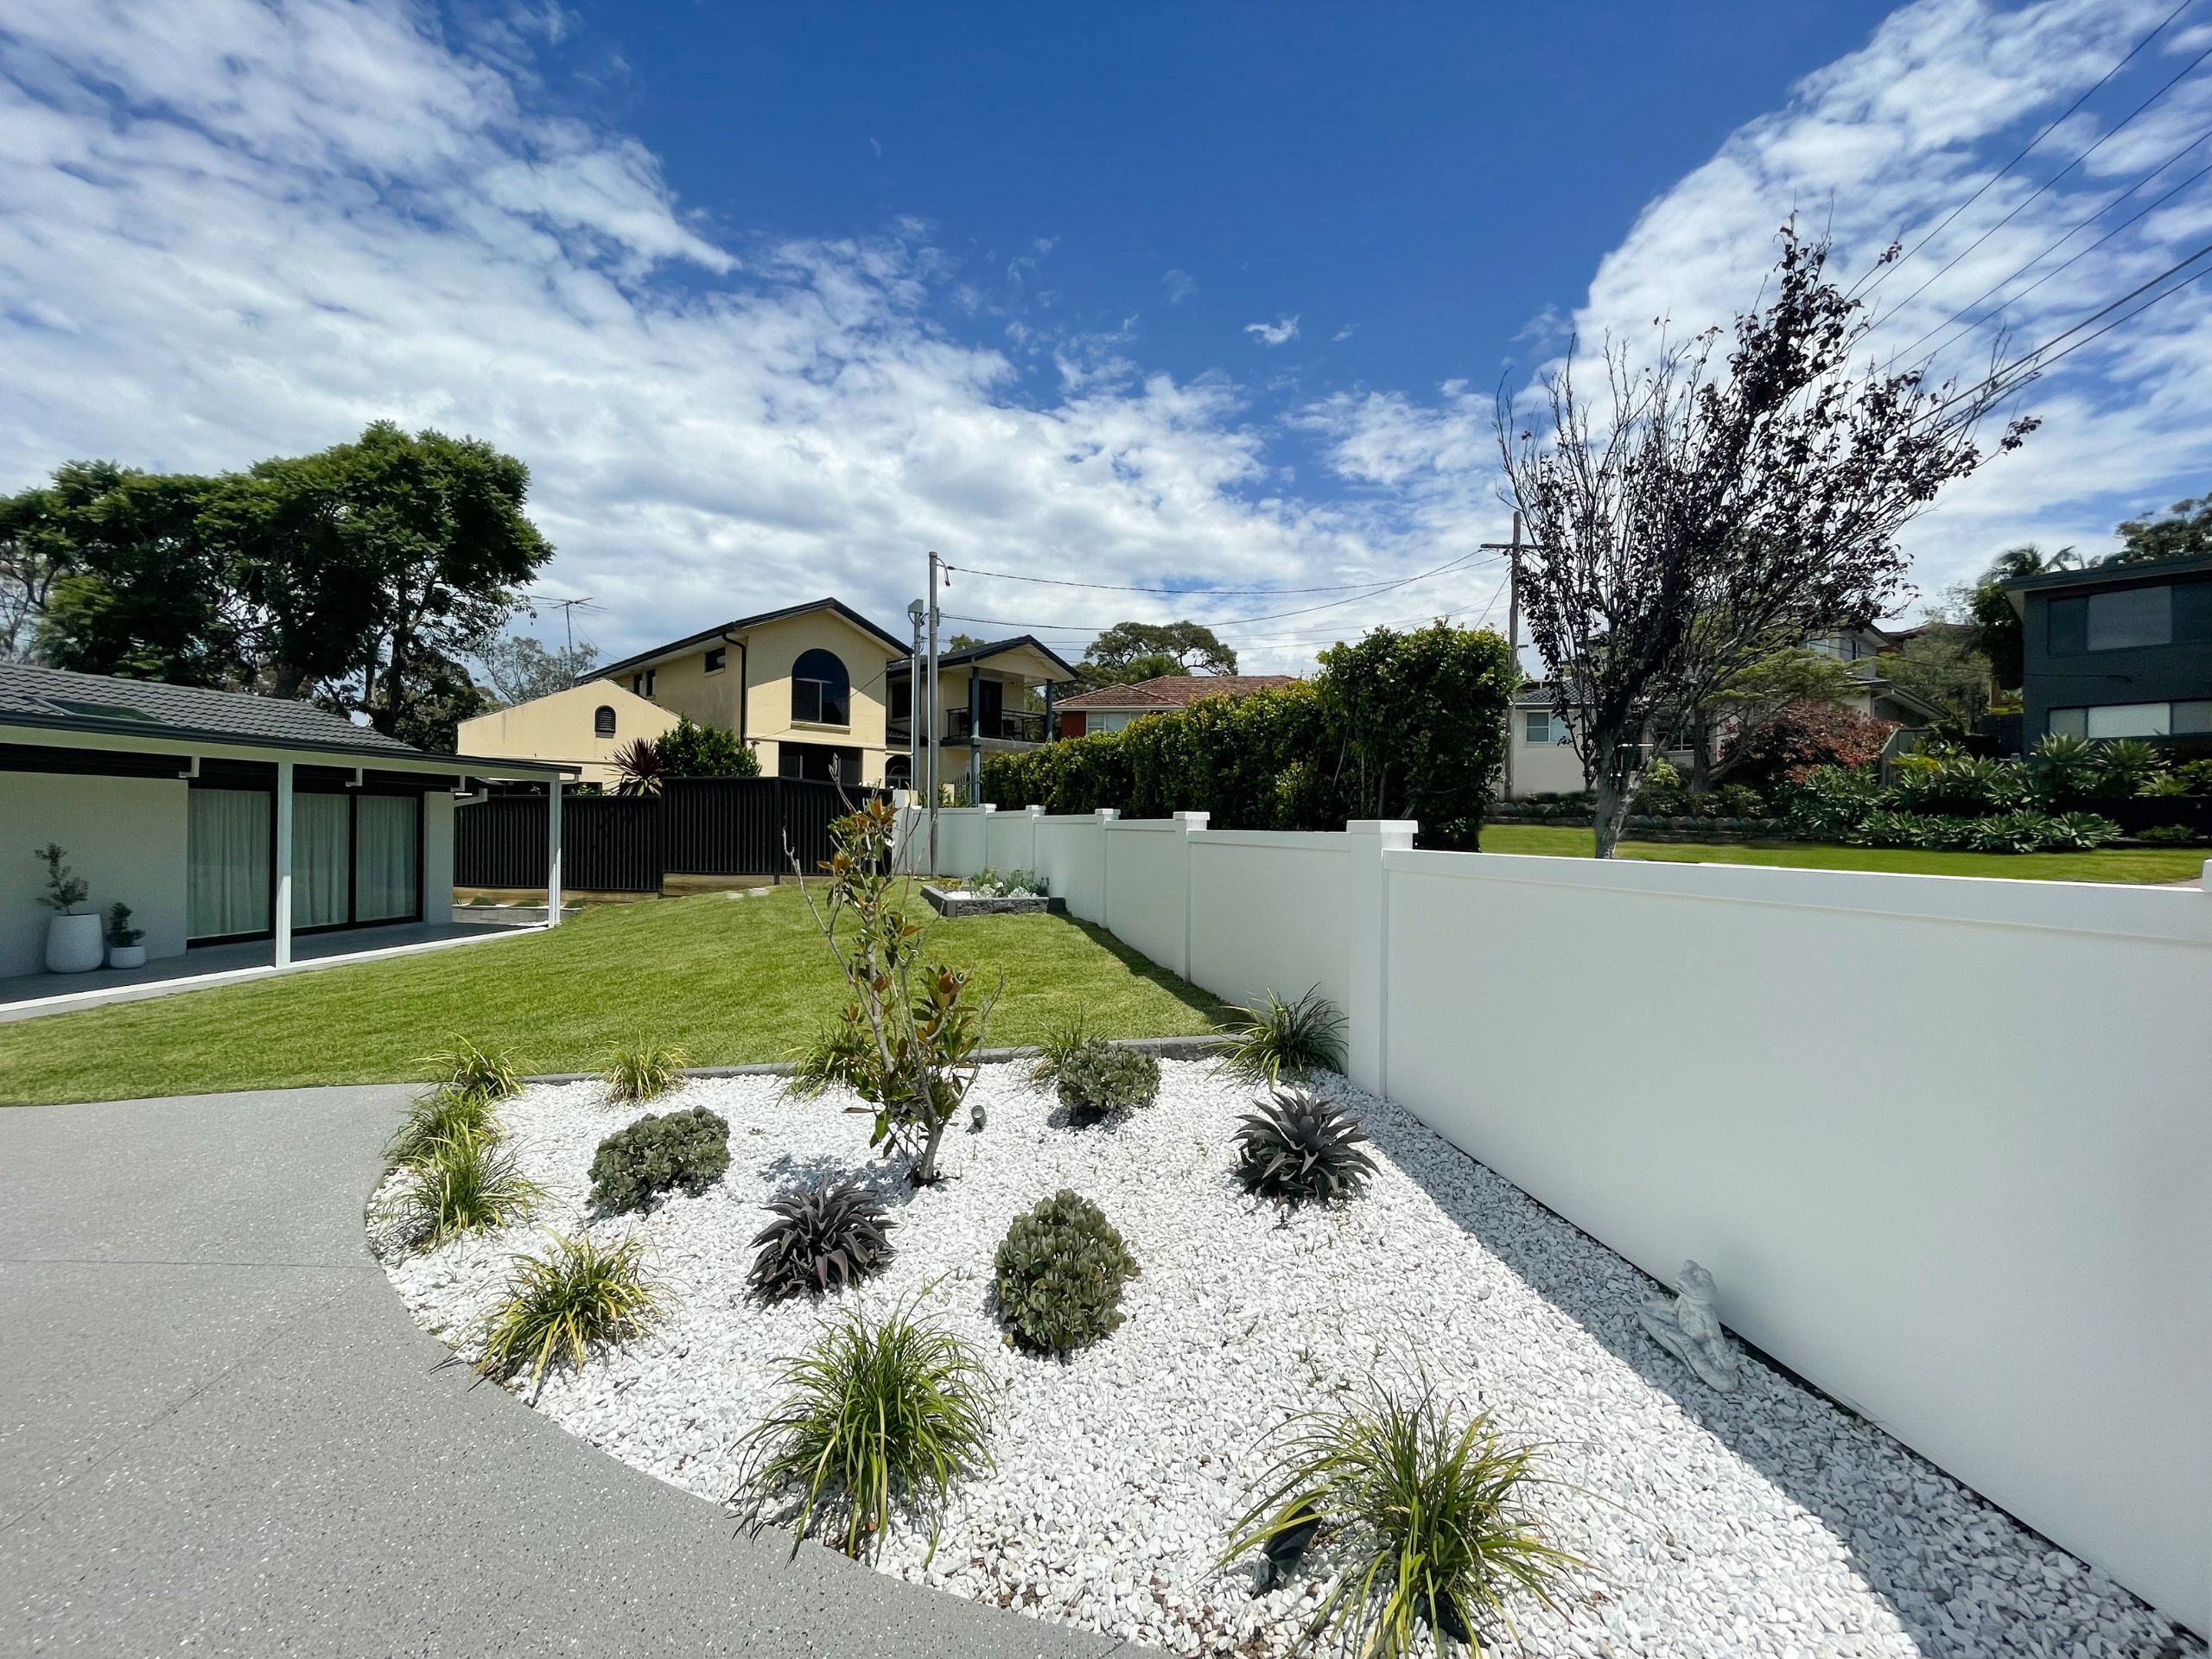 Stunning renovation complemented by modern front fence